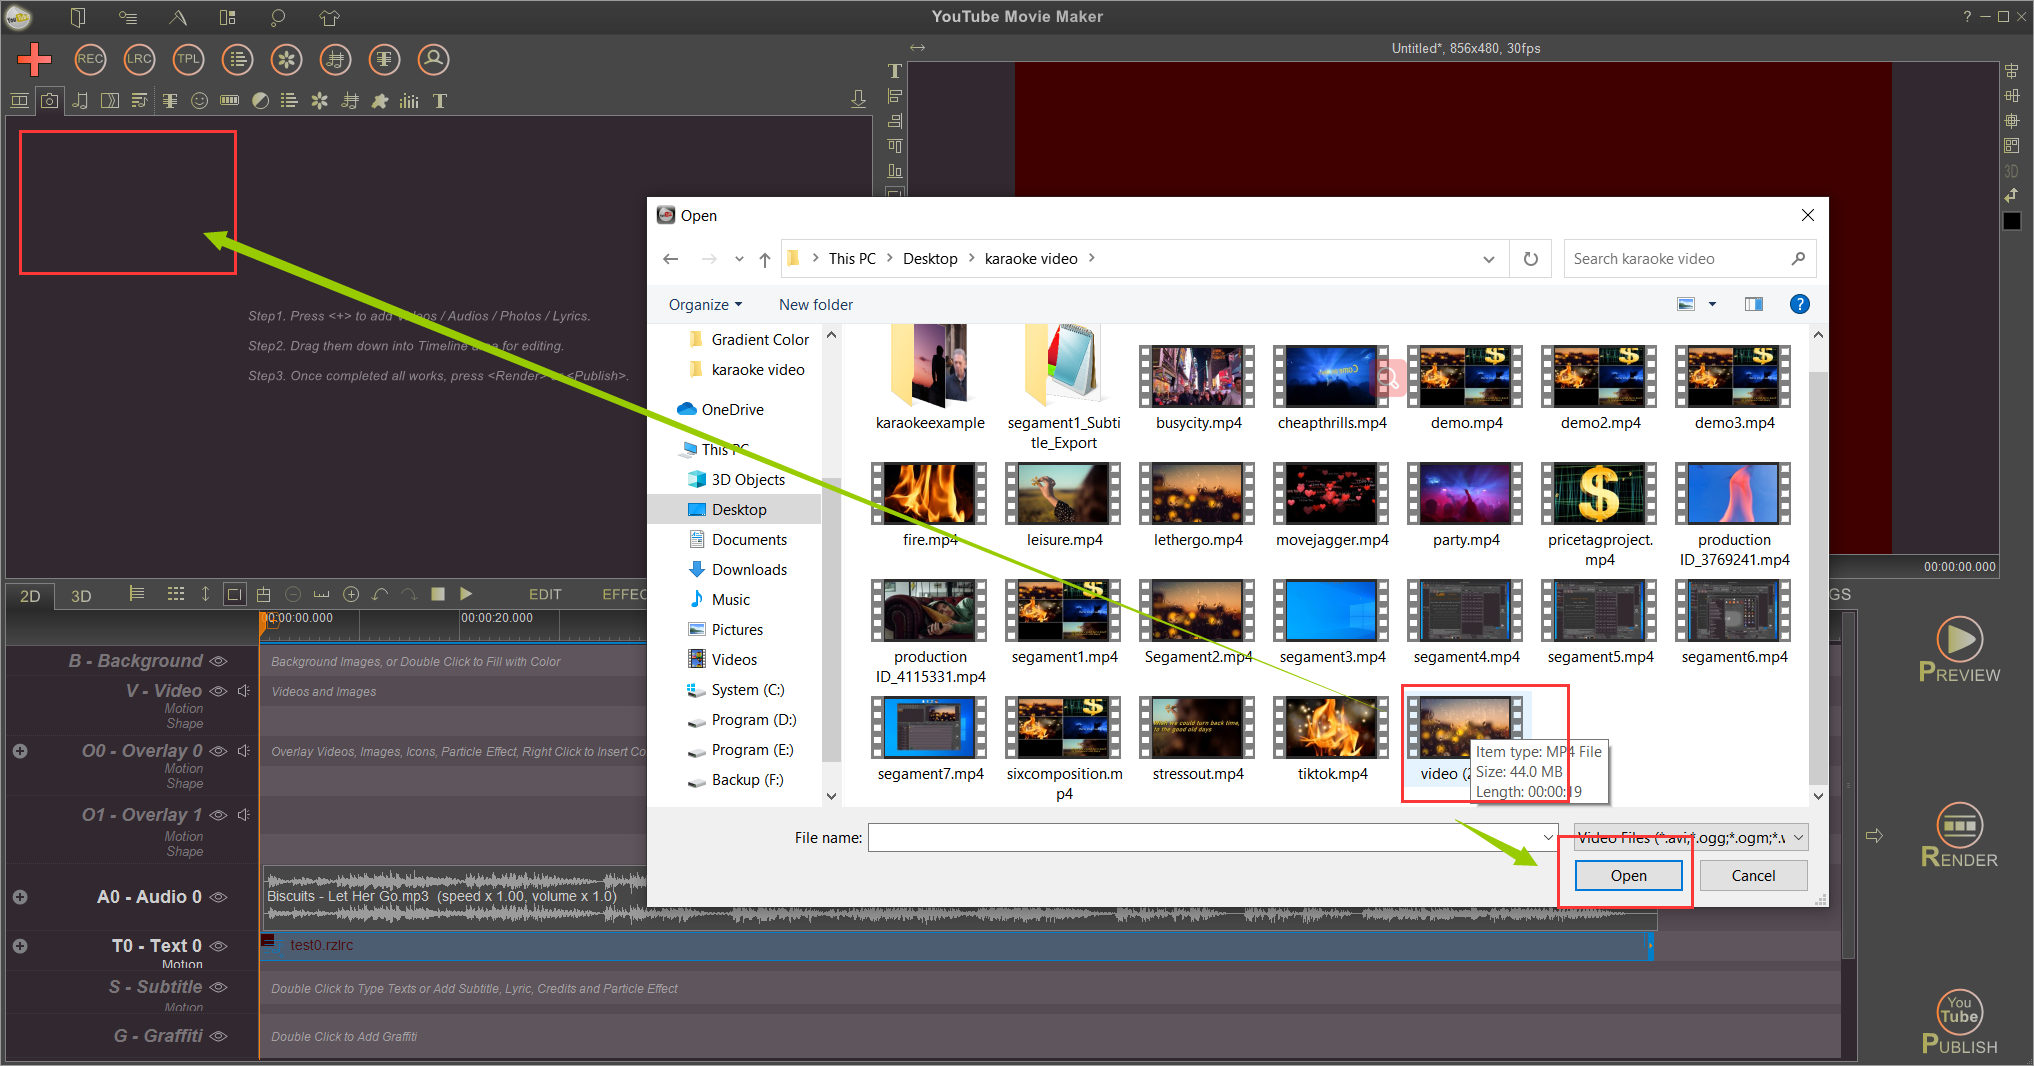 free download youtube movie maker full version